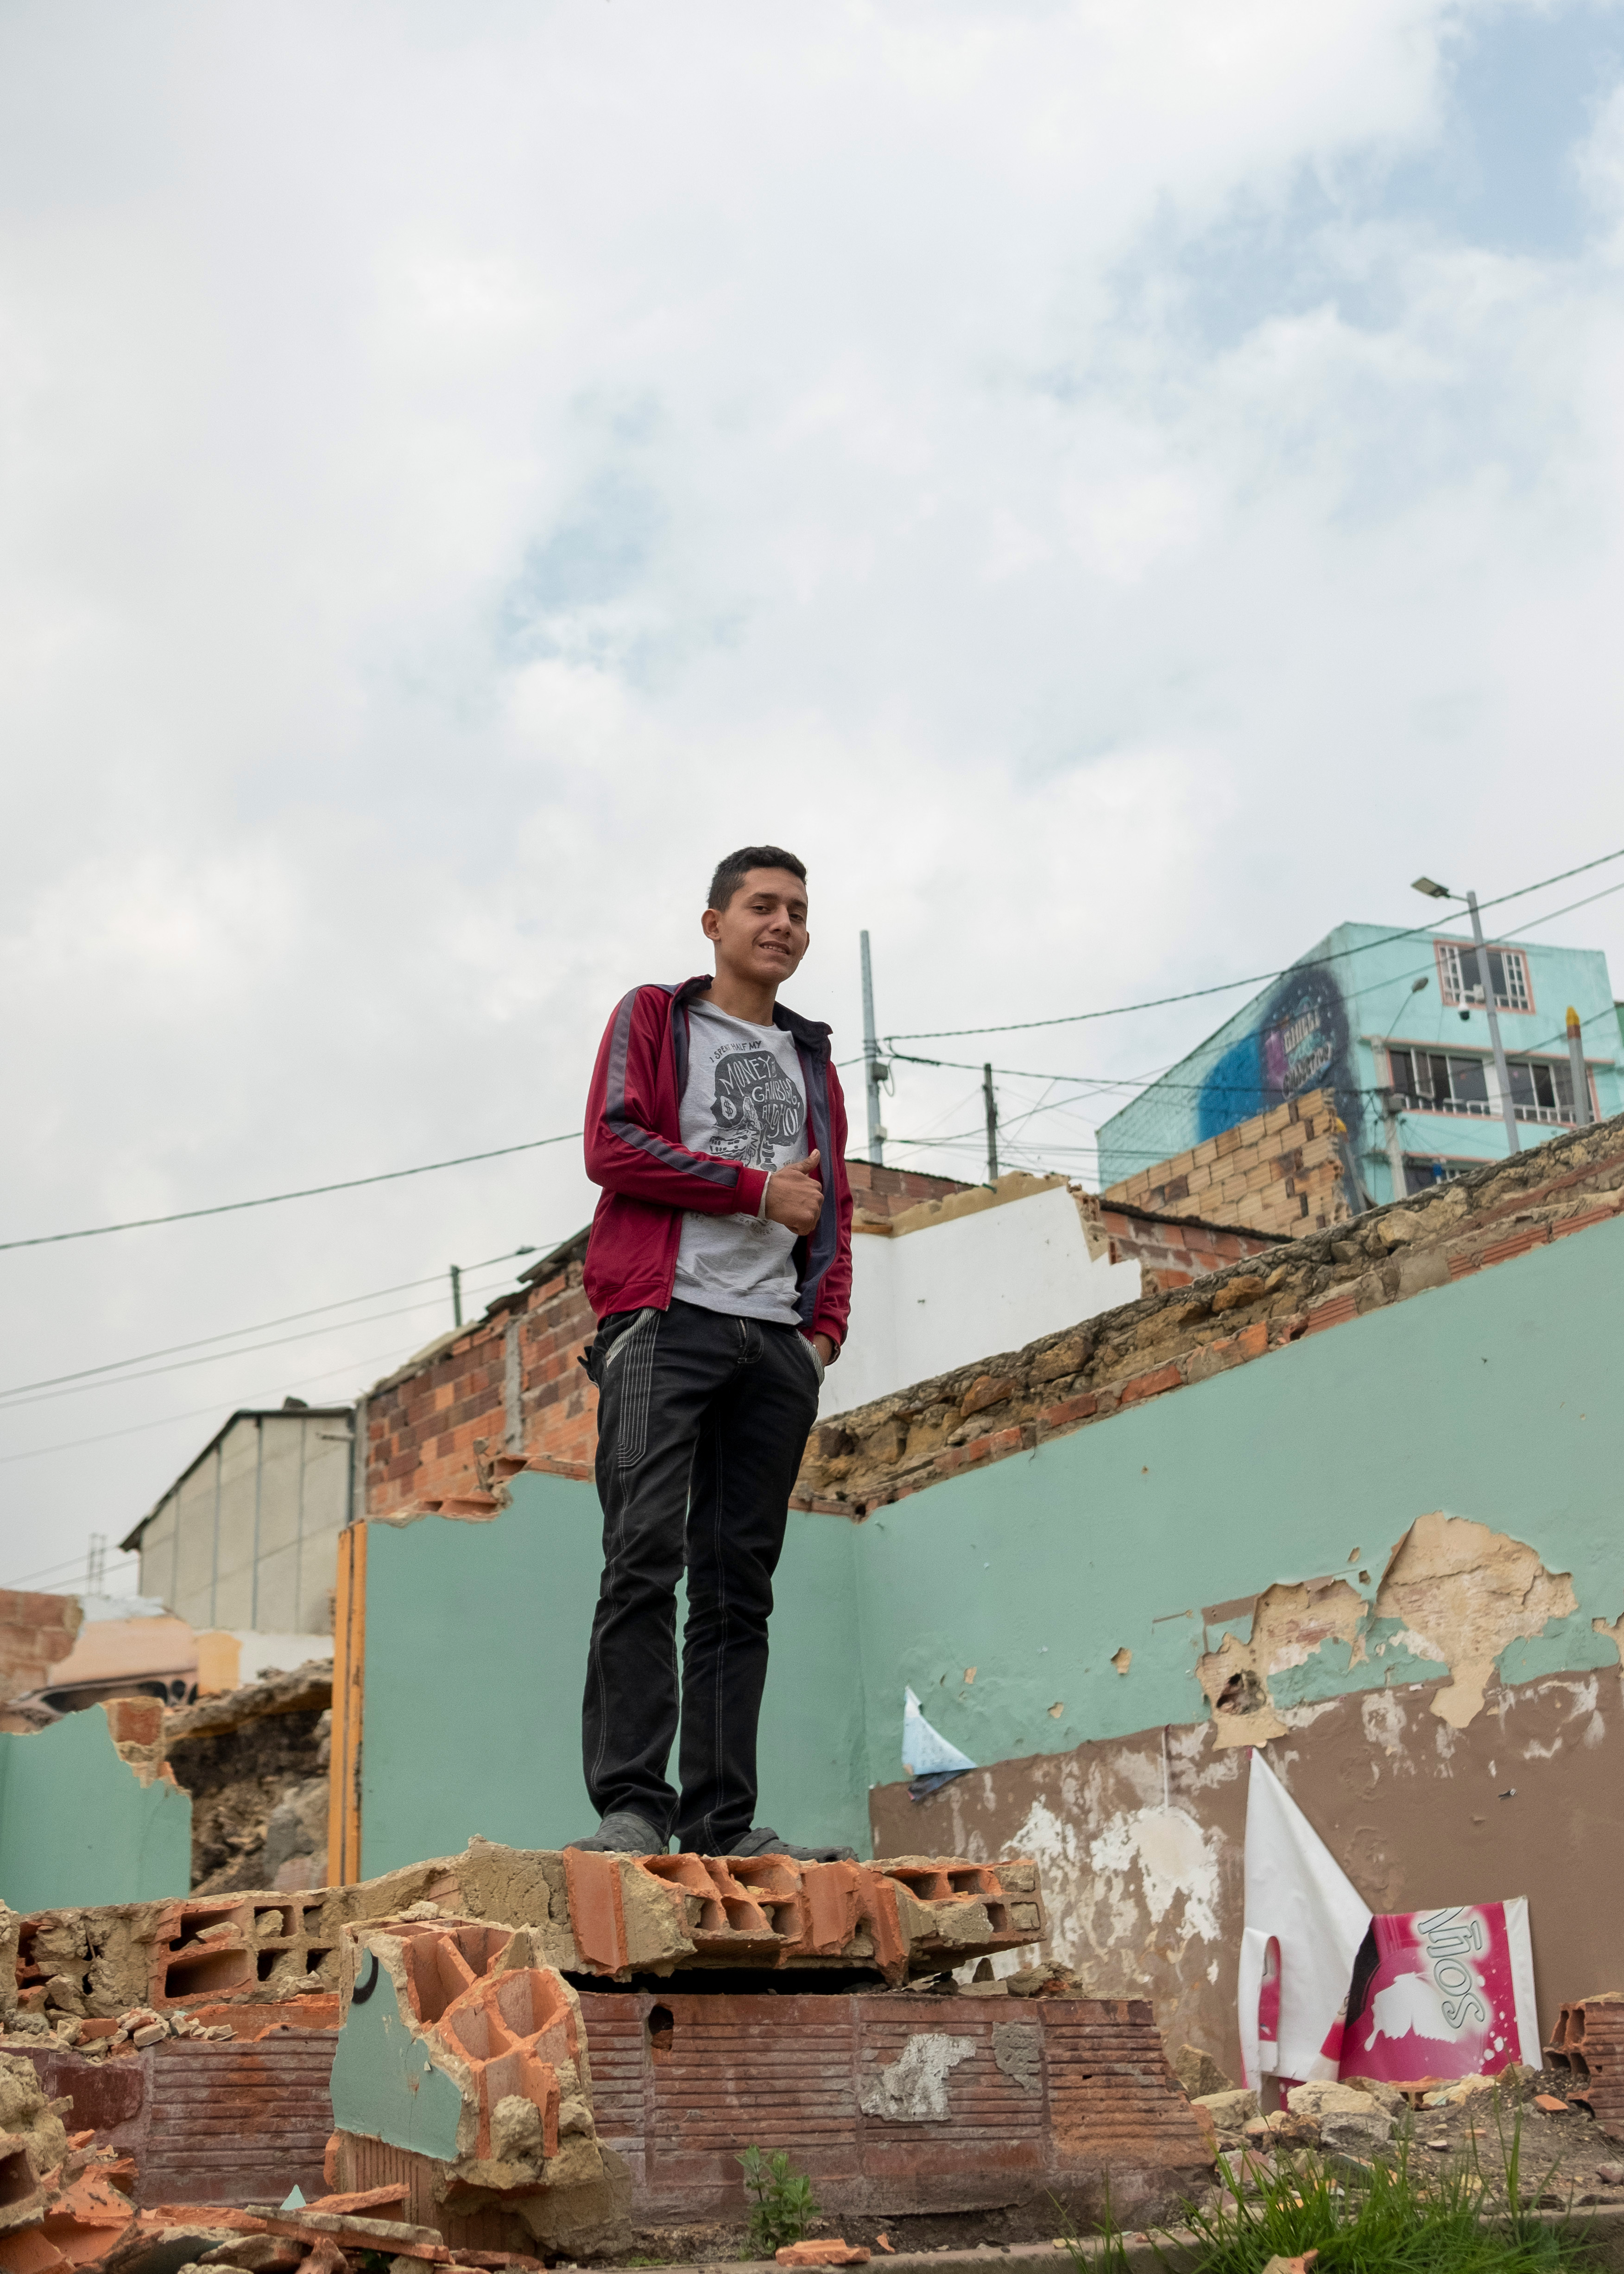 Mibzar, a 16-year-old Venezuelan migrant, stands on the foundation of a demolished home in El Paraíso.